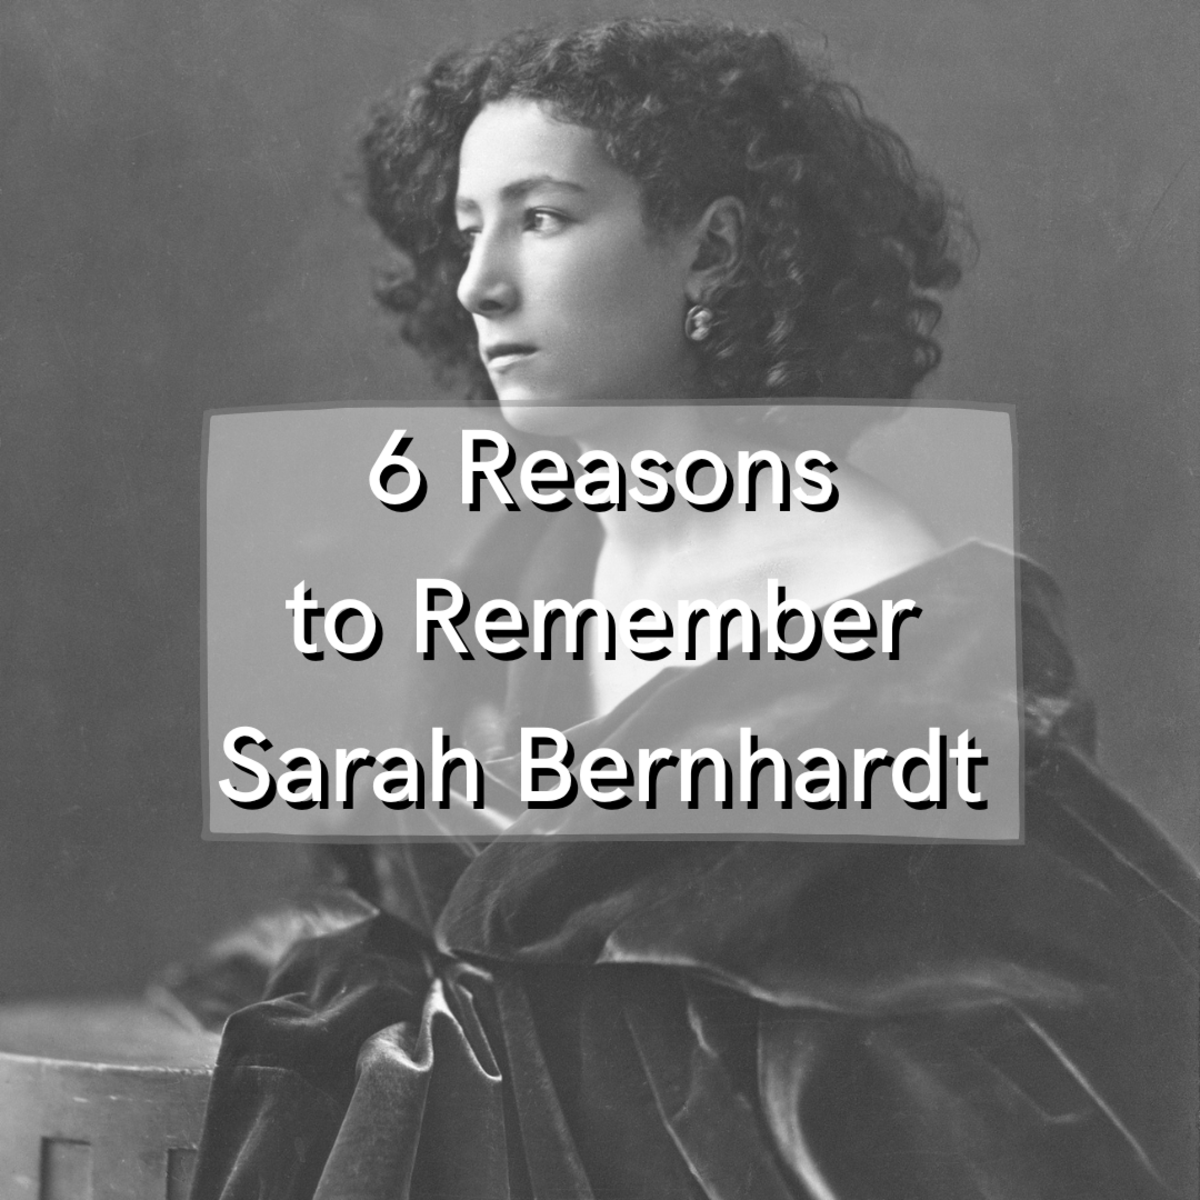 Read on to learn all about Sarah Bernhardt, the famous 19-century French actress.